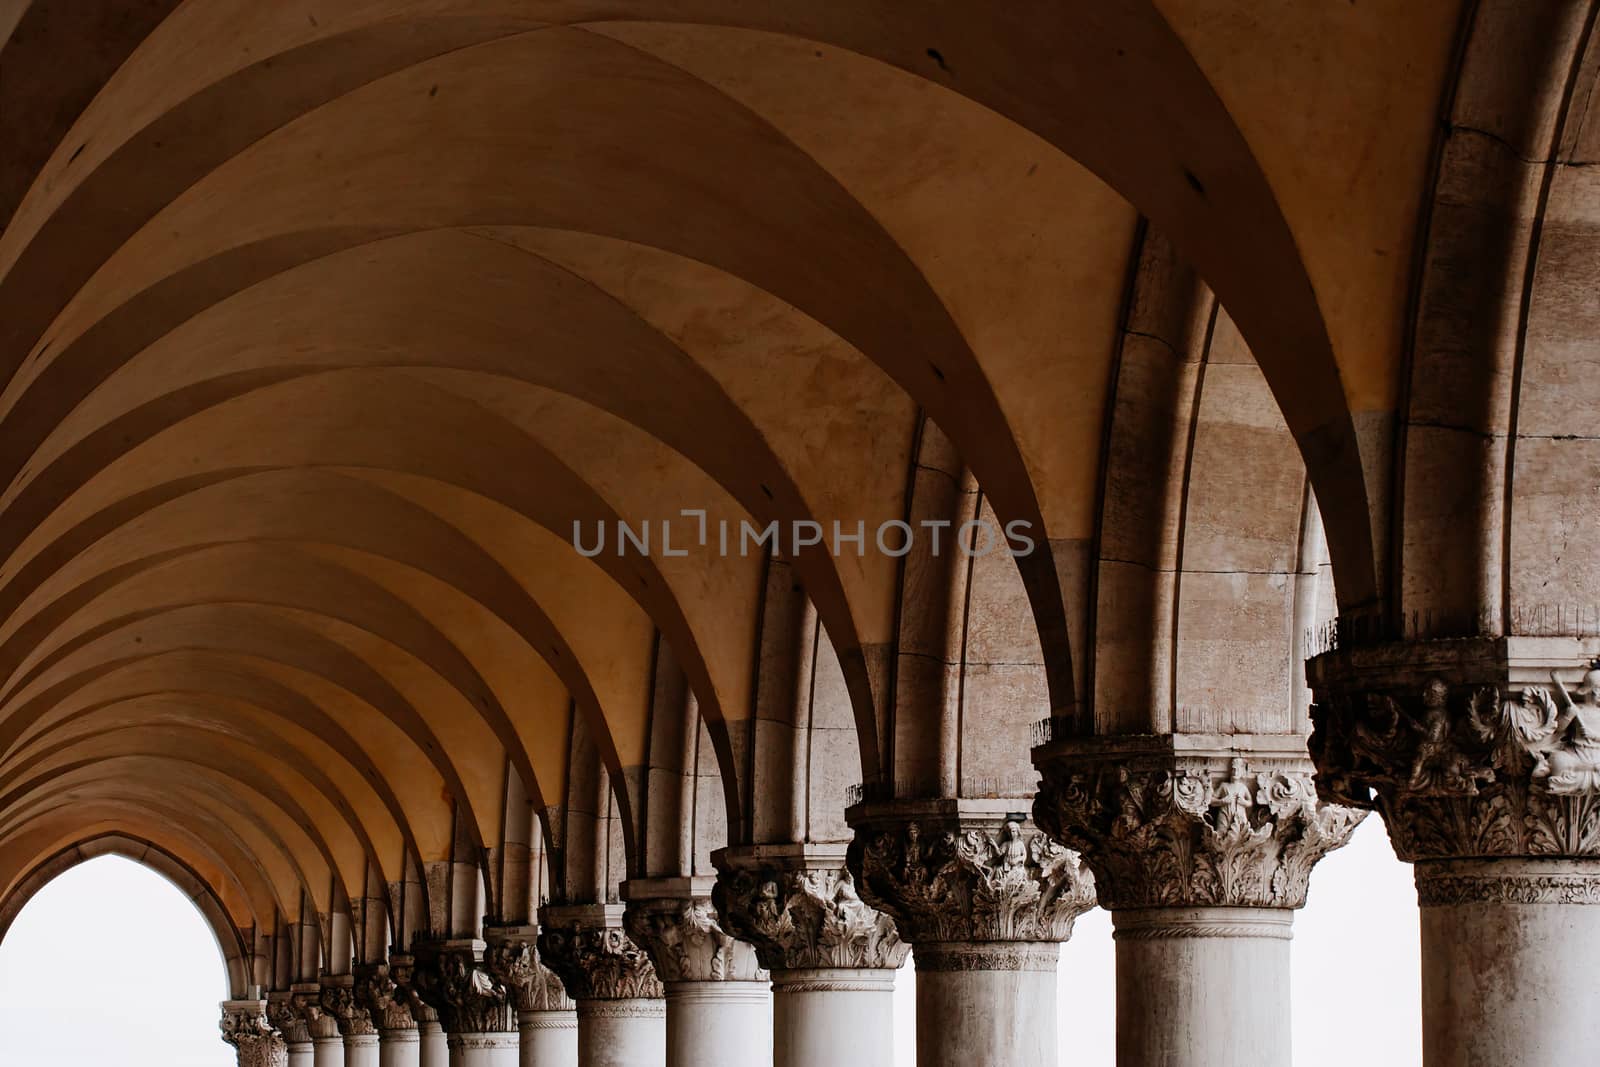 Photo of a row of arches and columns in Piazza San Marco in Venice Italy.